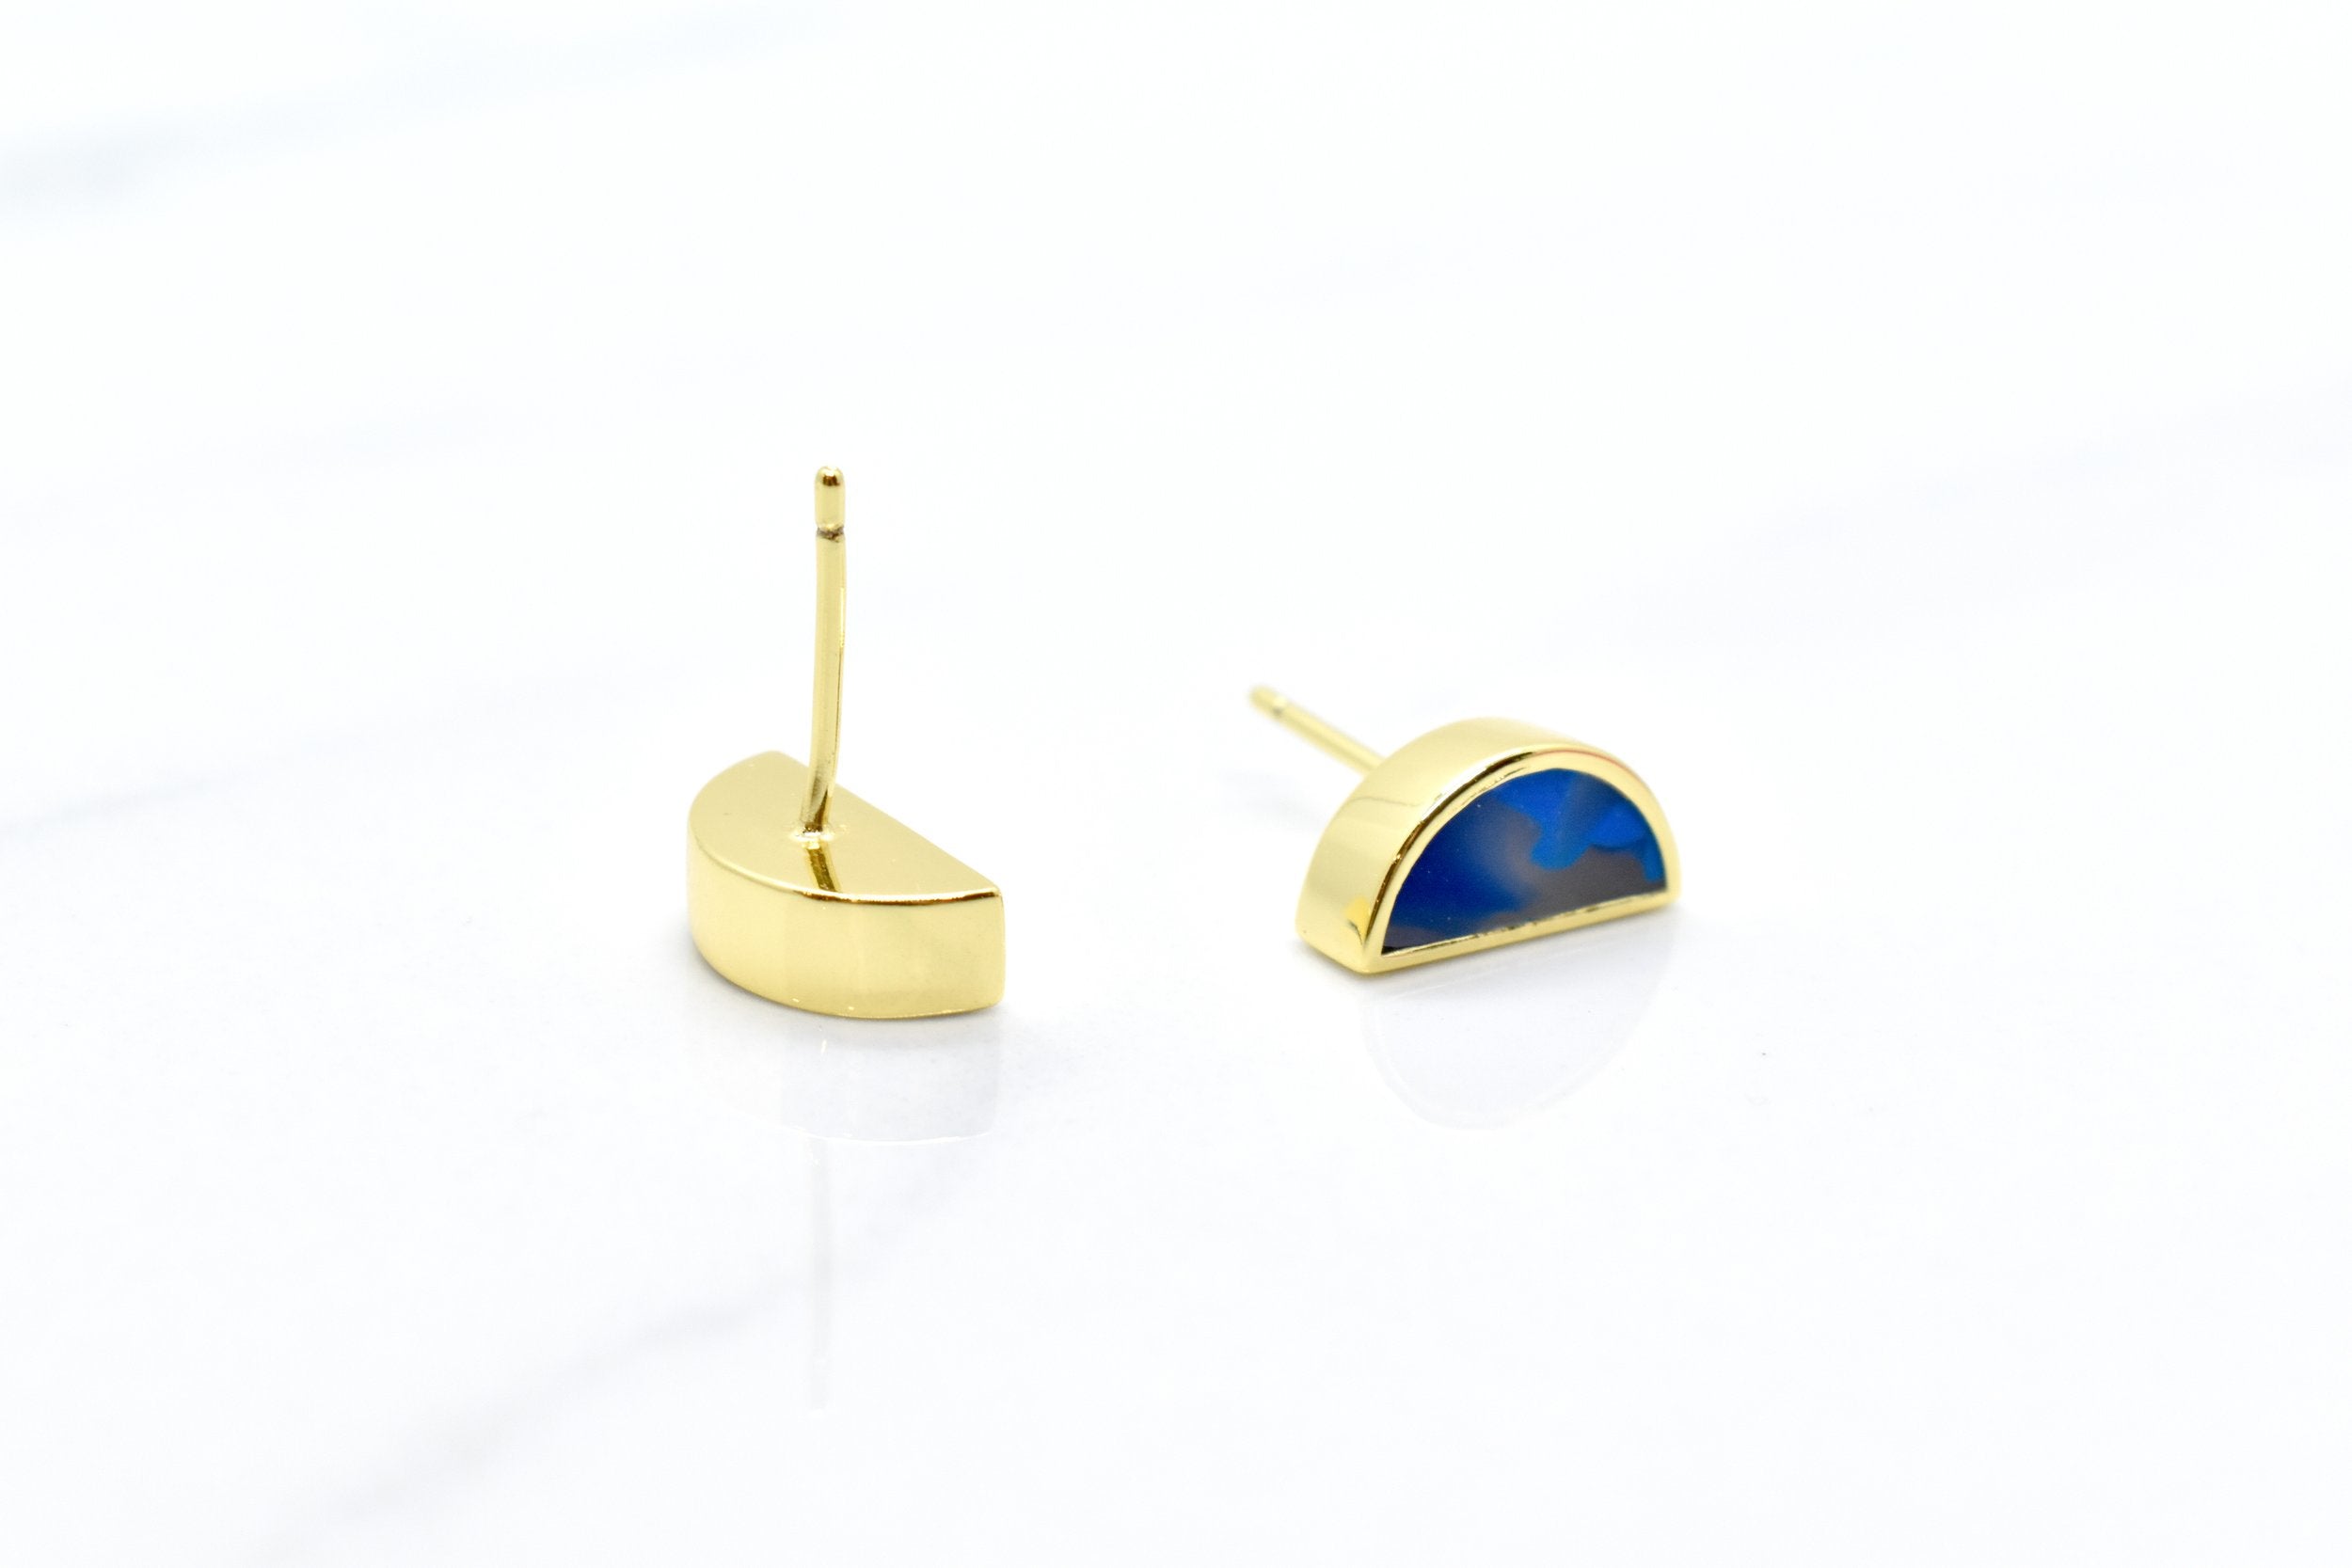 deep sapphire blue marbled tiny halfmoon earrings with 14k gold plating on white background